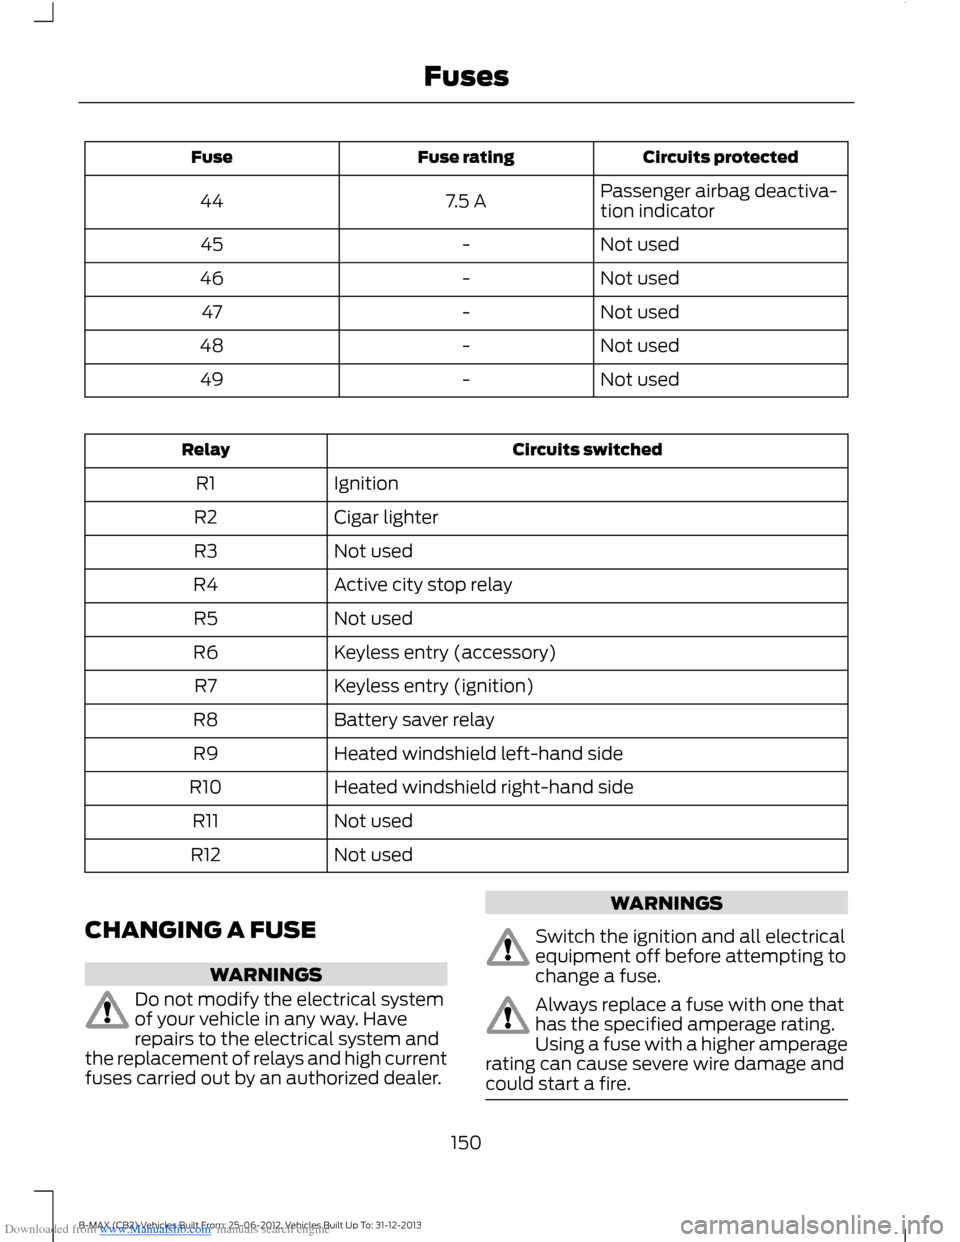 FORD B MAX 2013 1.G Owners Manual Downloaded from www.Manualslib.com manuals search engine Circuits protectedFuse ratingFuse
Passenger airbag deactiva-tion indicator7.5 A44
Not used-45
Not used-46
Not used-47
Not used-48
Not used-49
C